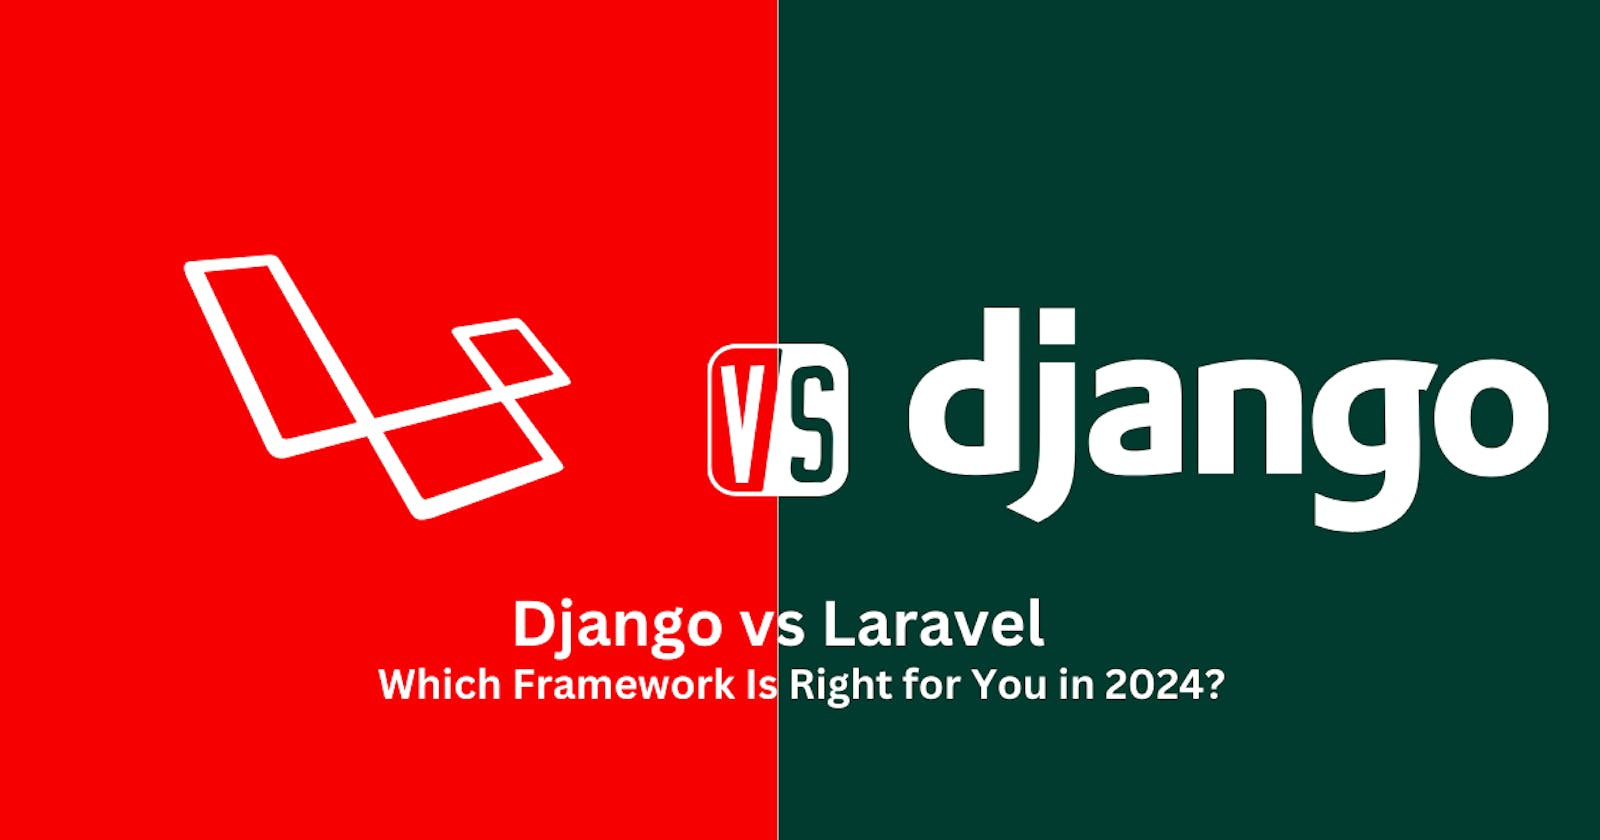 Django vs Laravel: Which Framework Is Right for You in 2024?